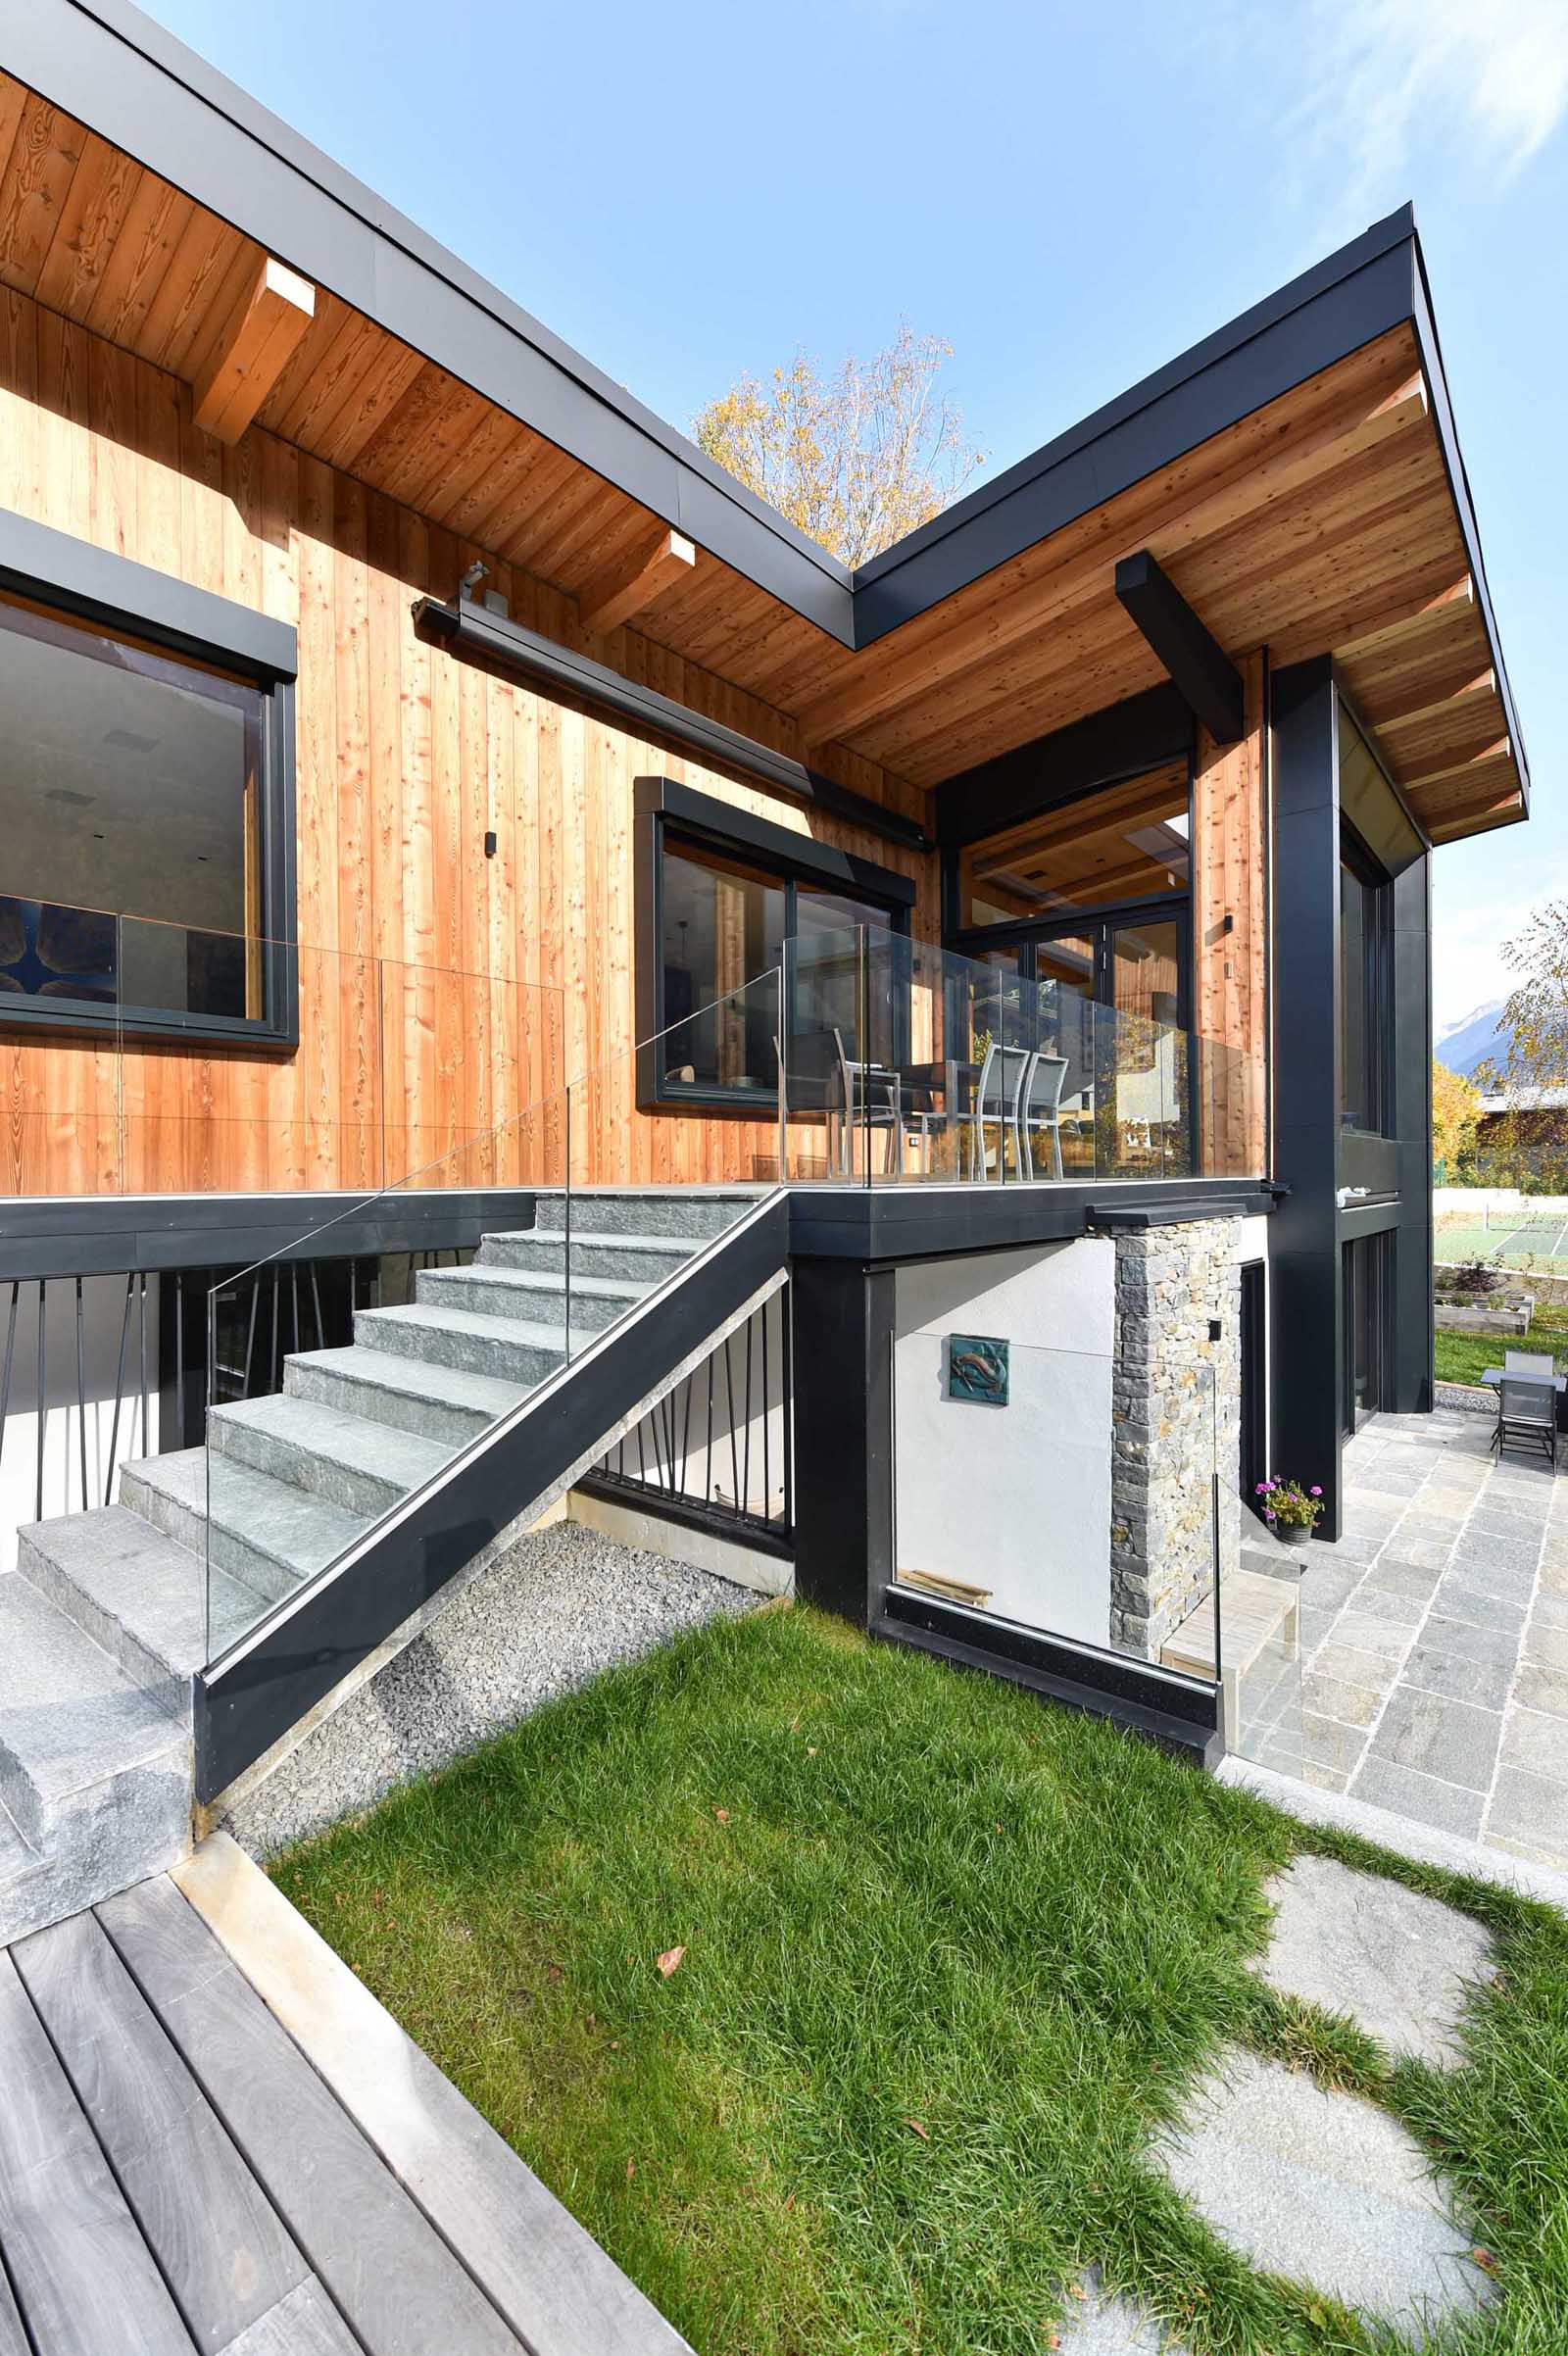 A modern home with wood siding, black accents, and stairs with glass railings.